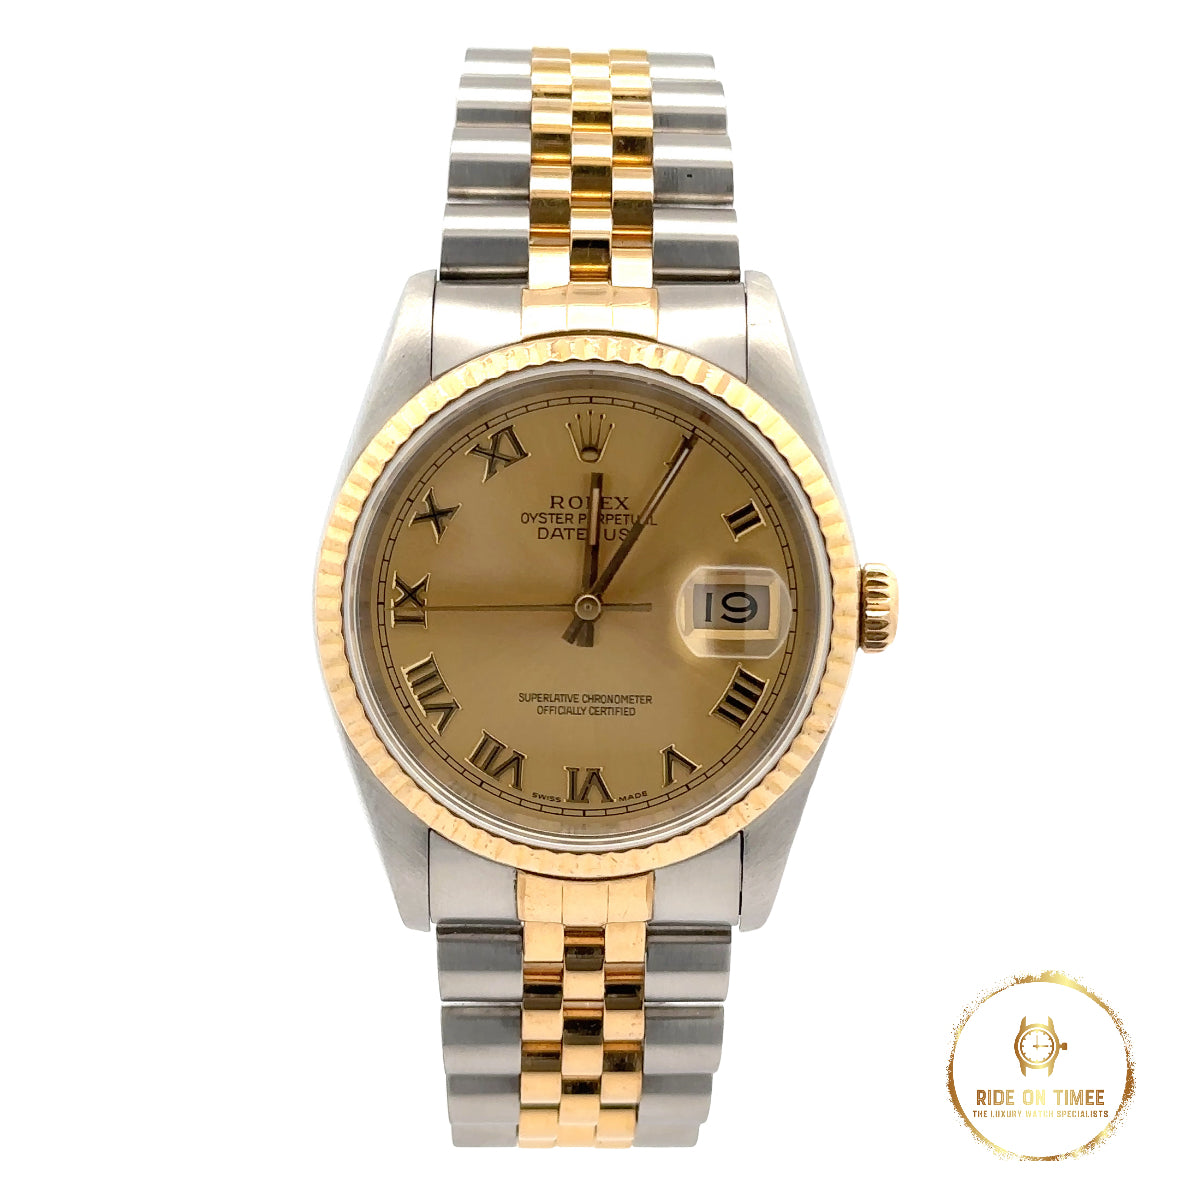 Rolex Datejust 36mm Factory Champagne Roman Dial ‘16233’ - Ride On Timee